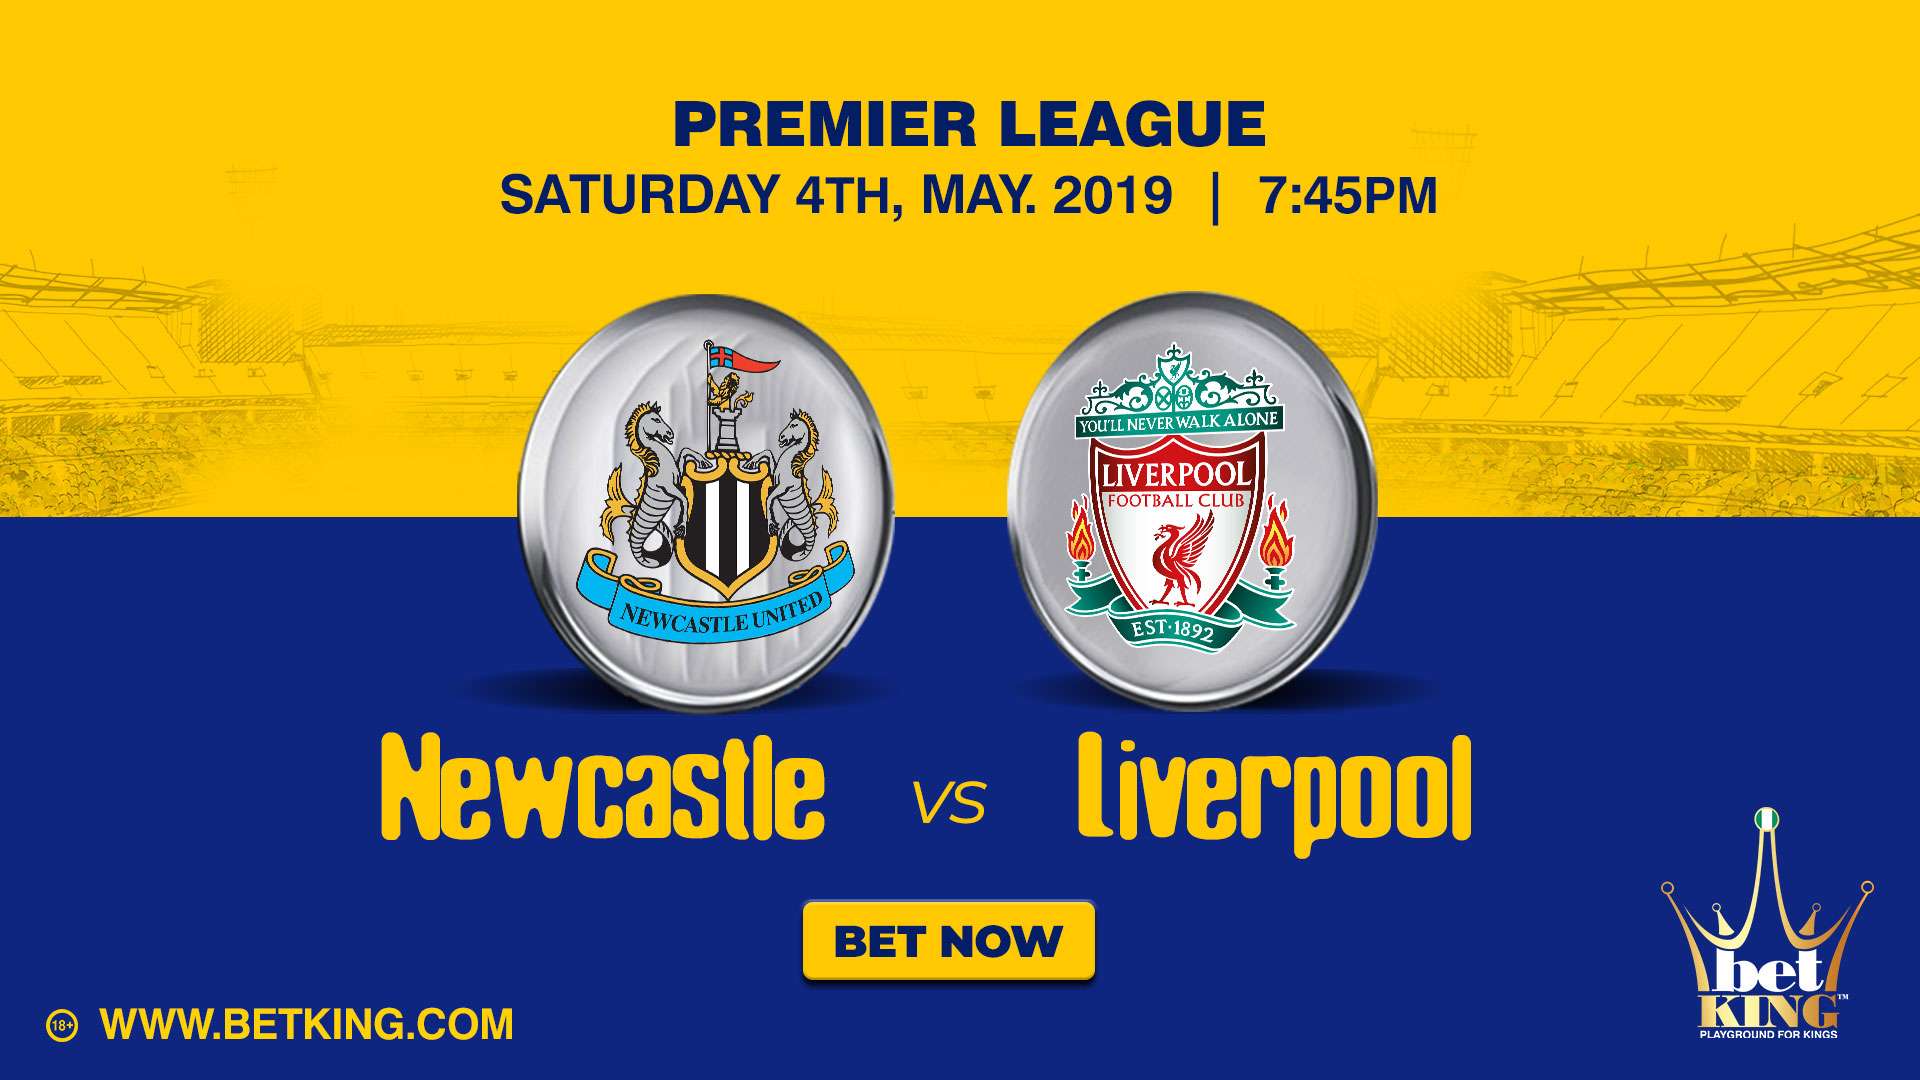 Betking Newcastle Liverpool